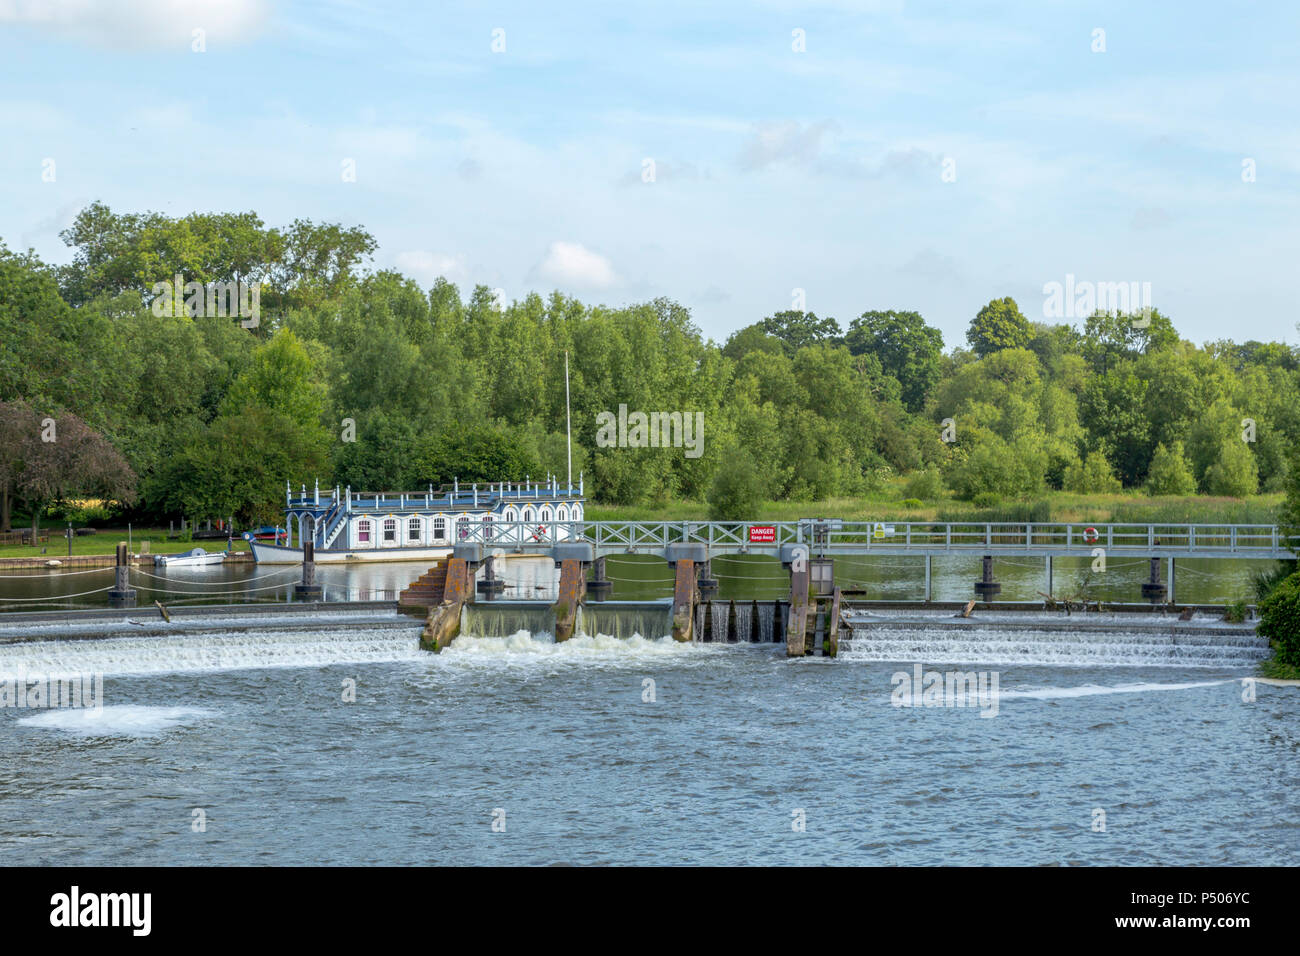 Flood waters passing through a weir on the River Thames at Goring-on-thames, Oxfordshire, England, United Kingdom. Stock Photo